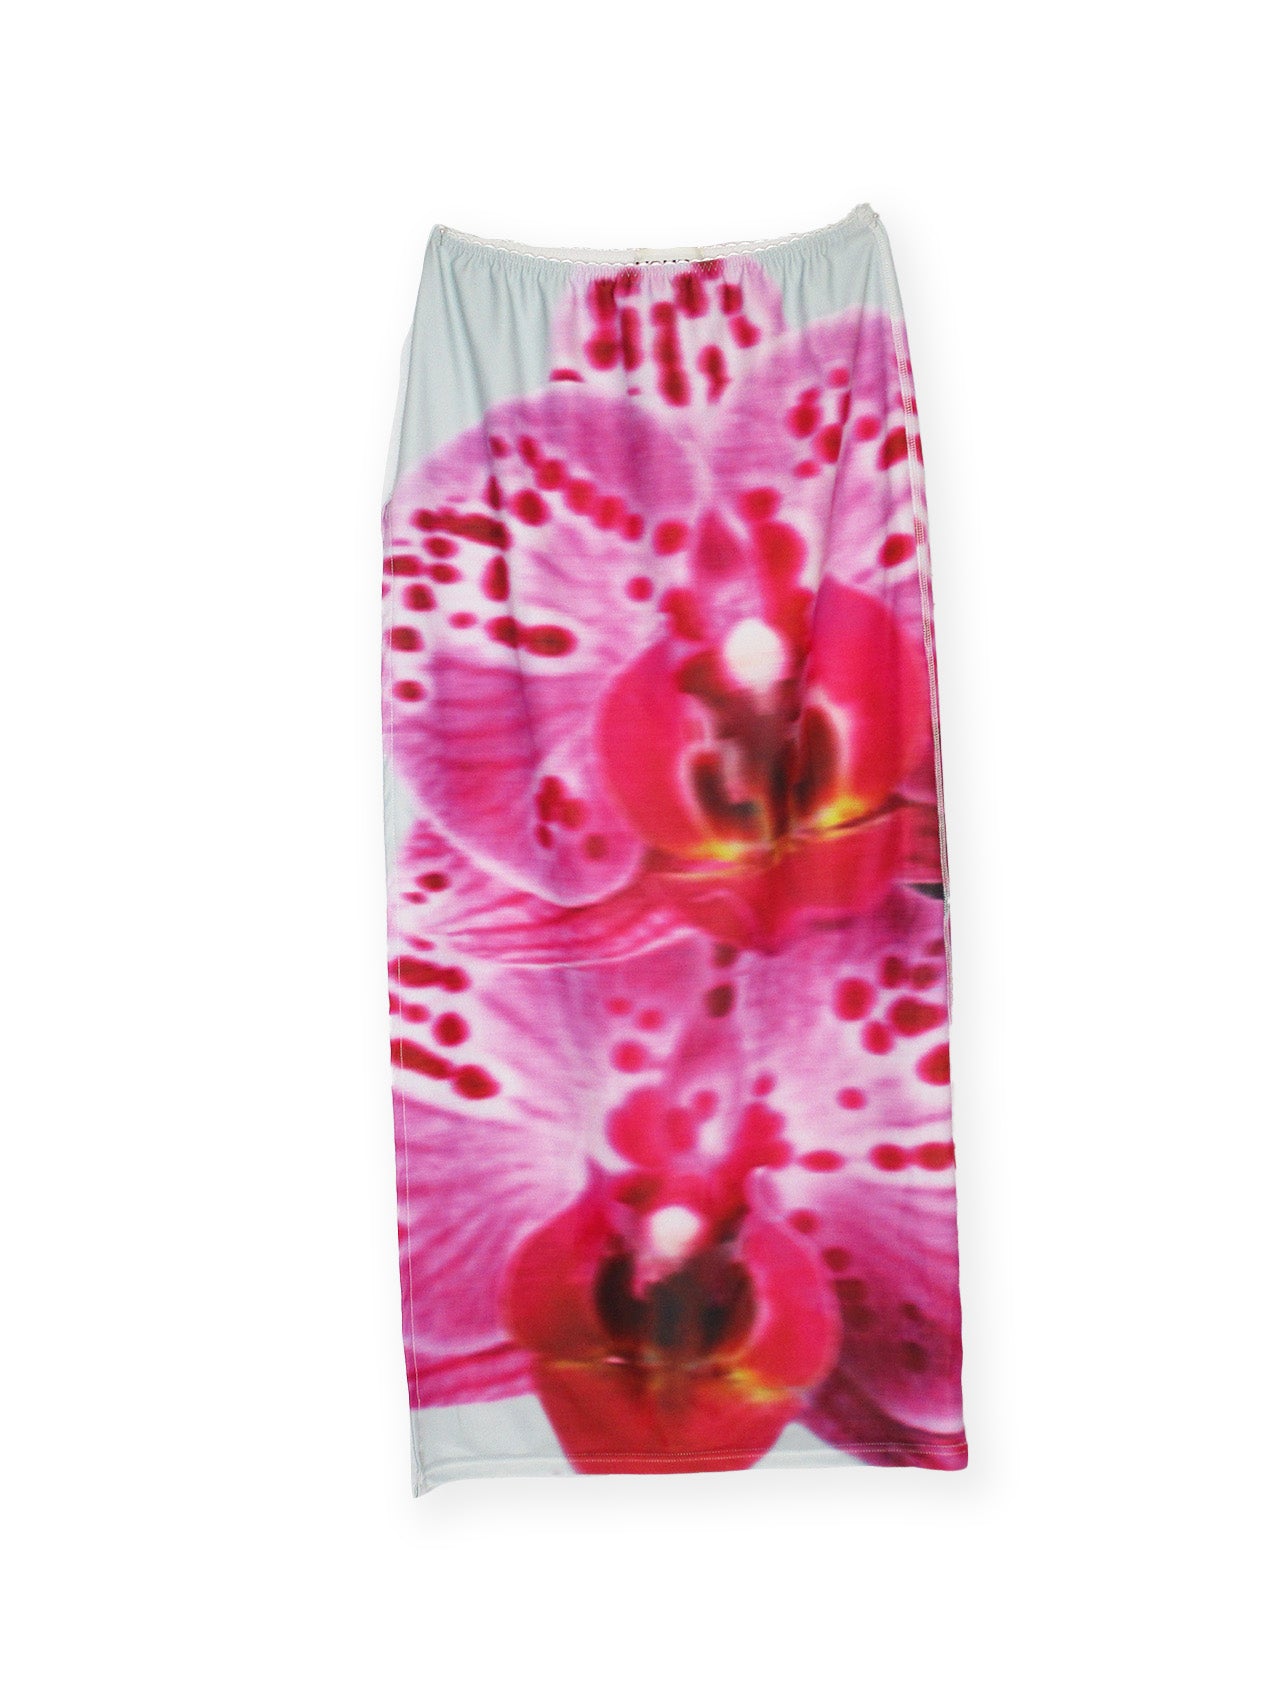 ORCHID SKIRT | ORCHID PRINT